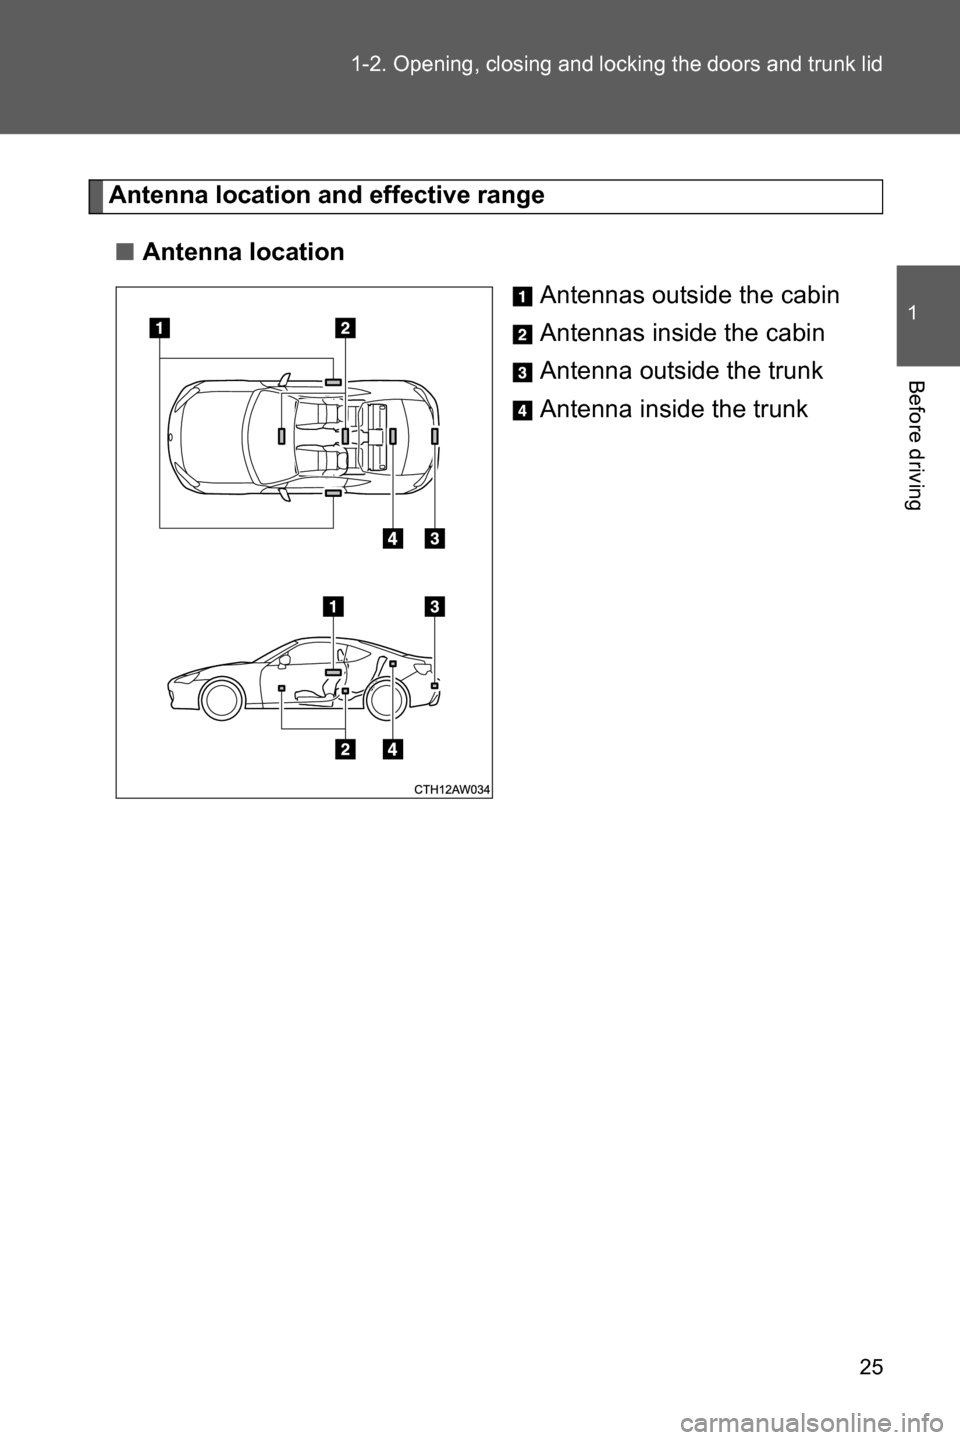 SUBARU BRZ 2016 1.G Owners Manual 25 1-2. Opening, closing and locking the doors and trunk lid
1
Before driving
Antenna location and effective range
■Antenna location
Antennas outside the cabin
Antennas inside the cabin
Antenna outs